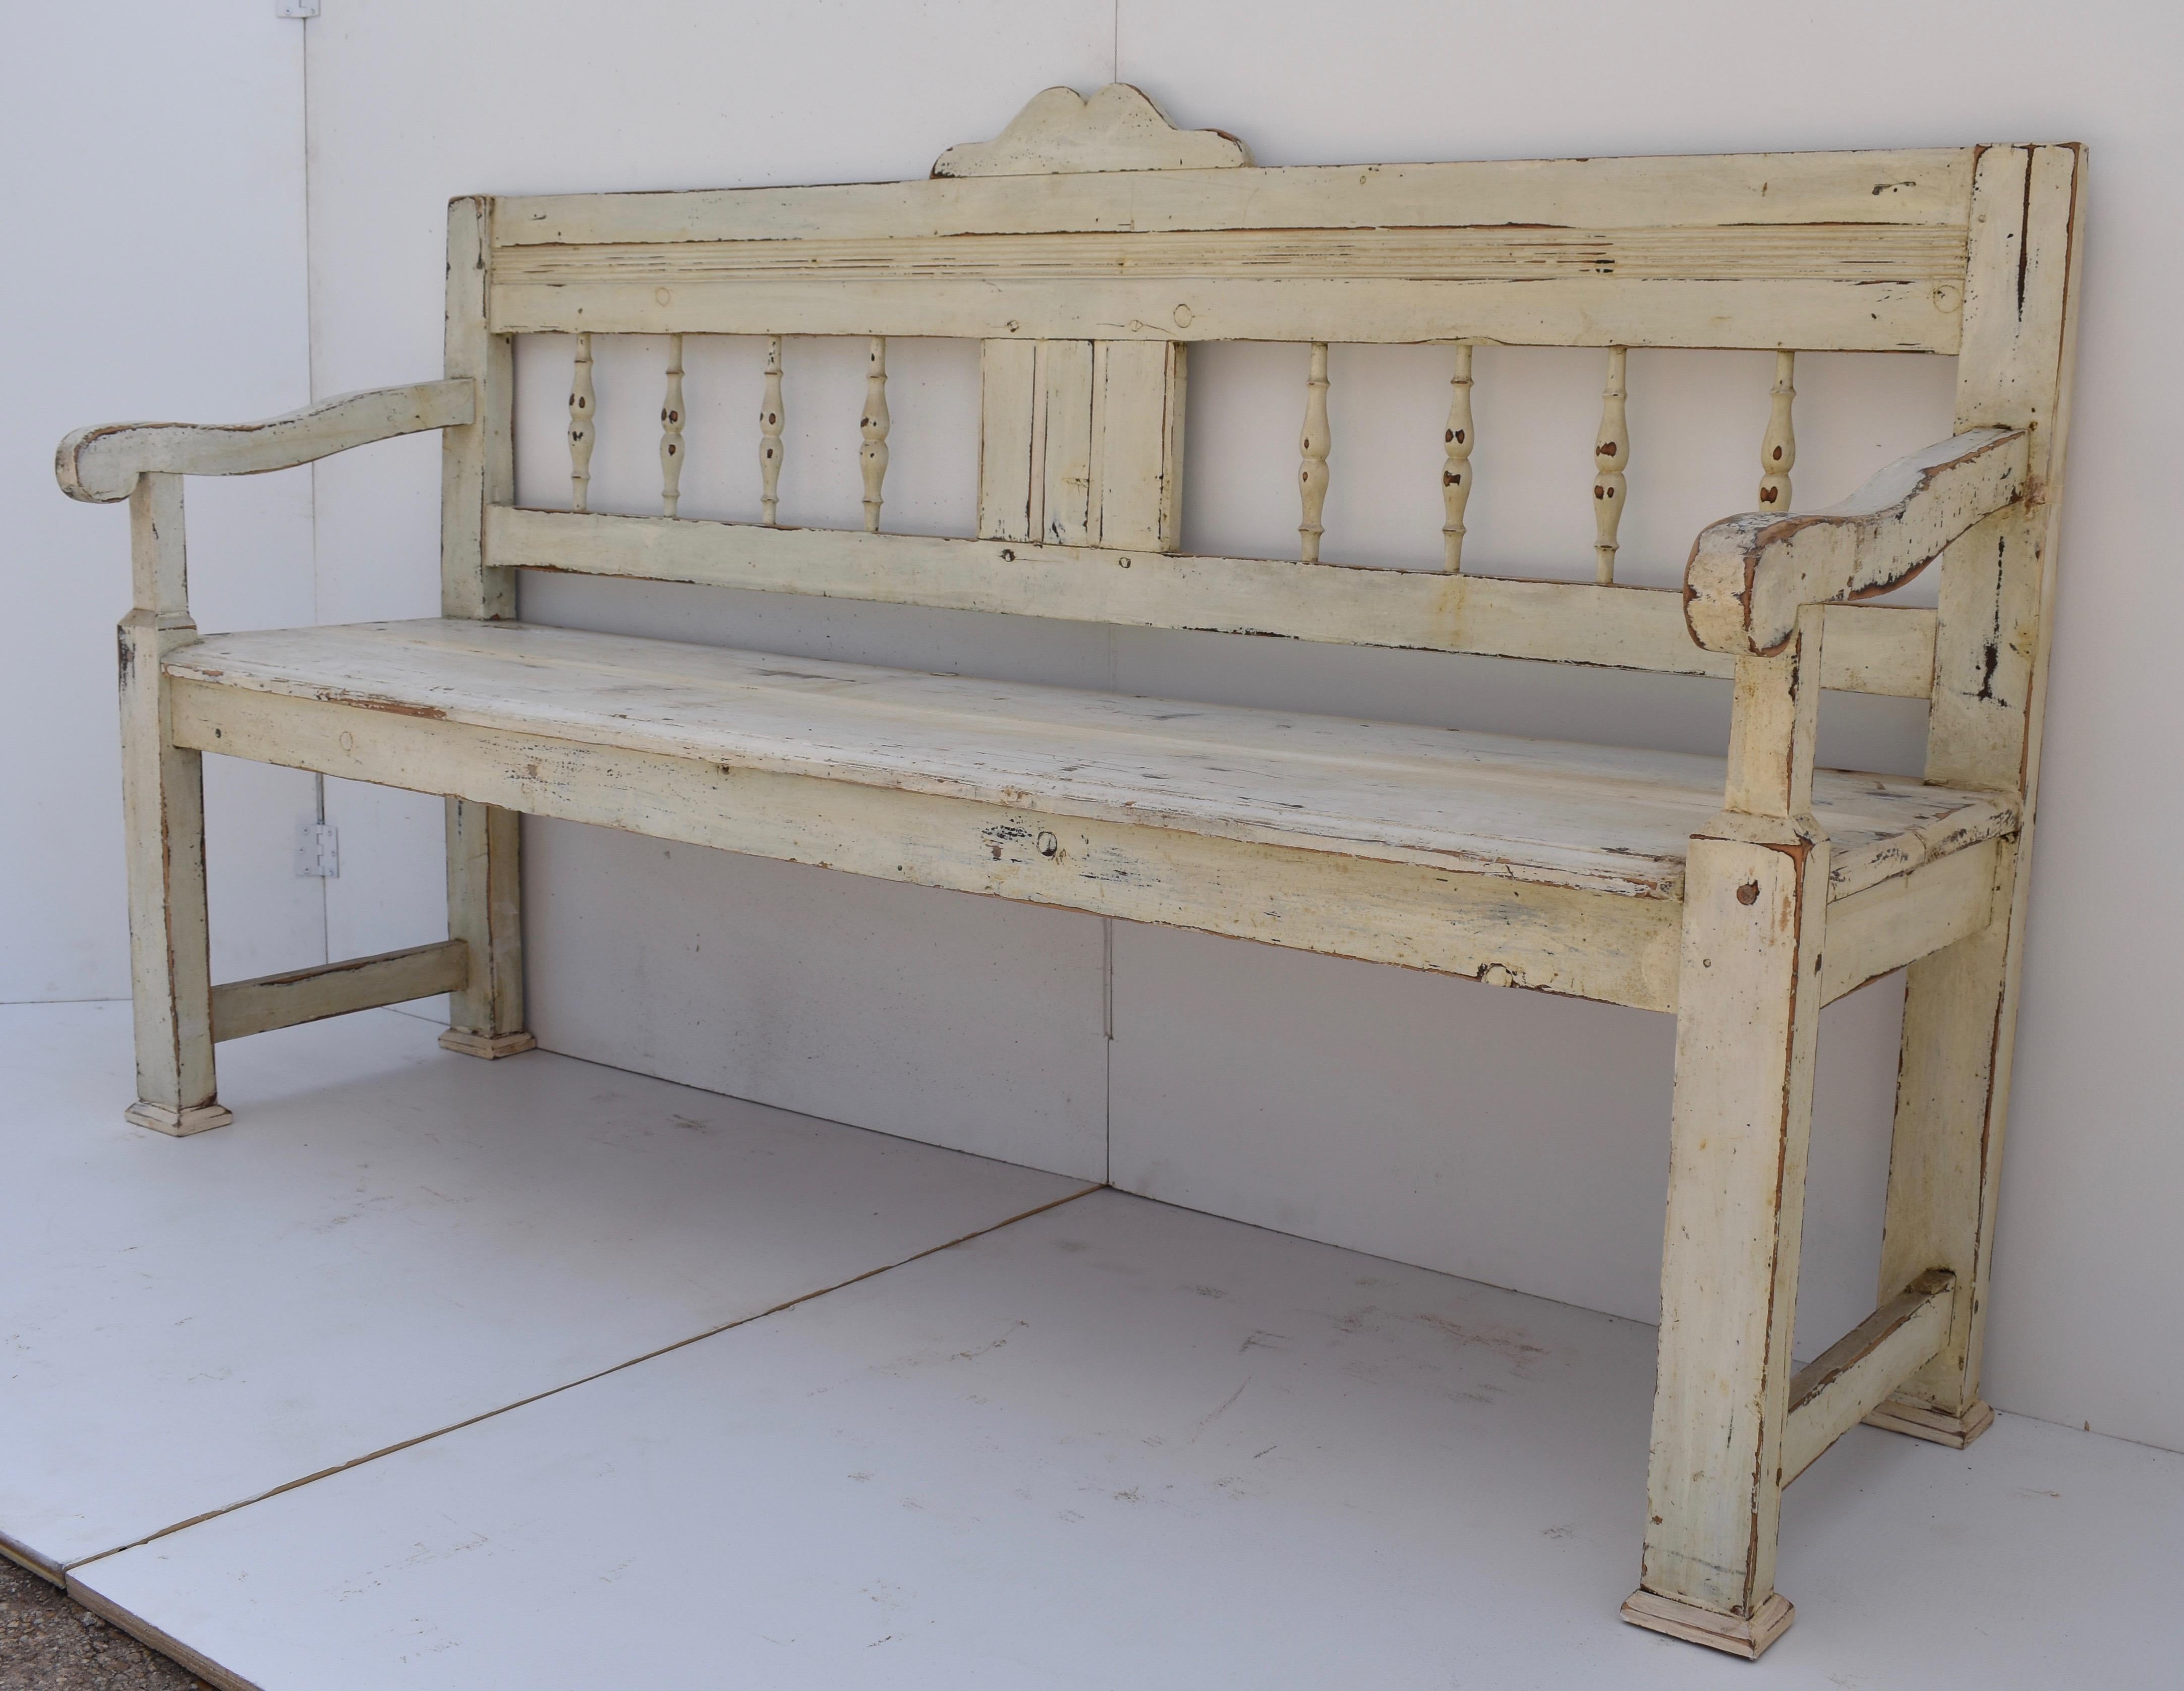 This rather stately pine bench has a small scallop cresting a bold top rail above a central faux paneled splat flanked by four turned spindles each side. The shapely protruding arms are supported by nicely tapered front legs. In old white paint worn